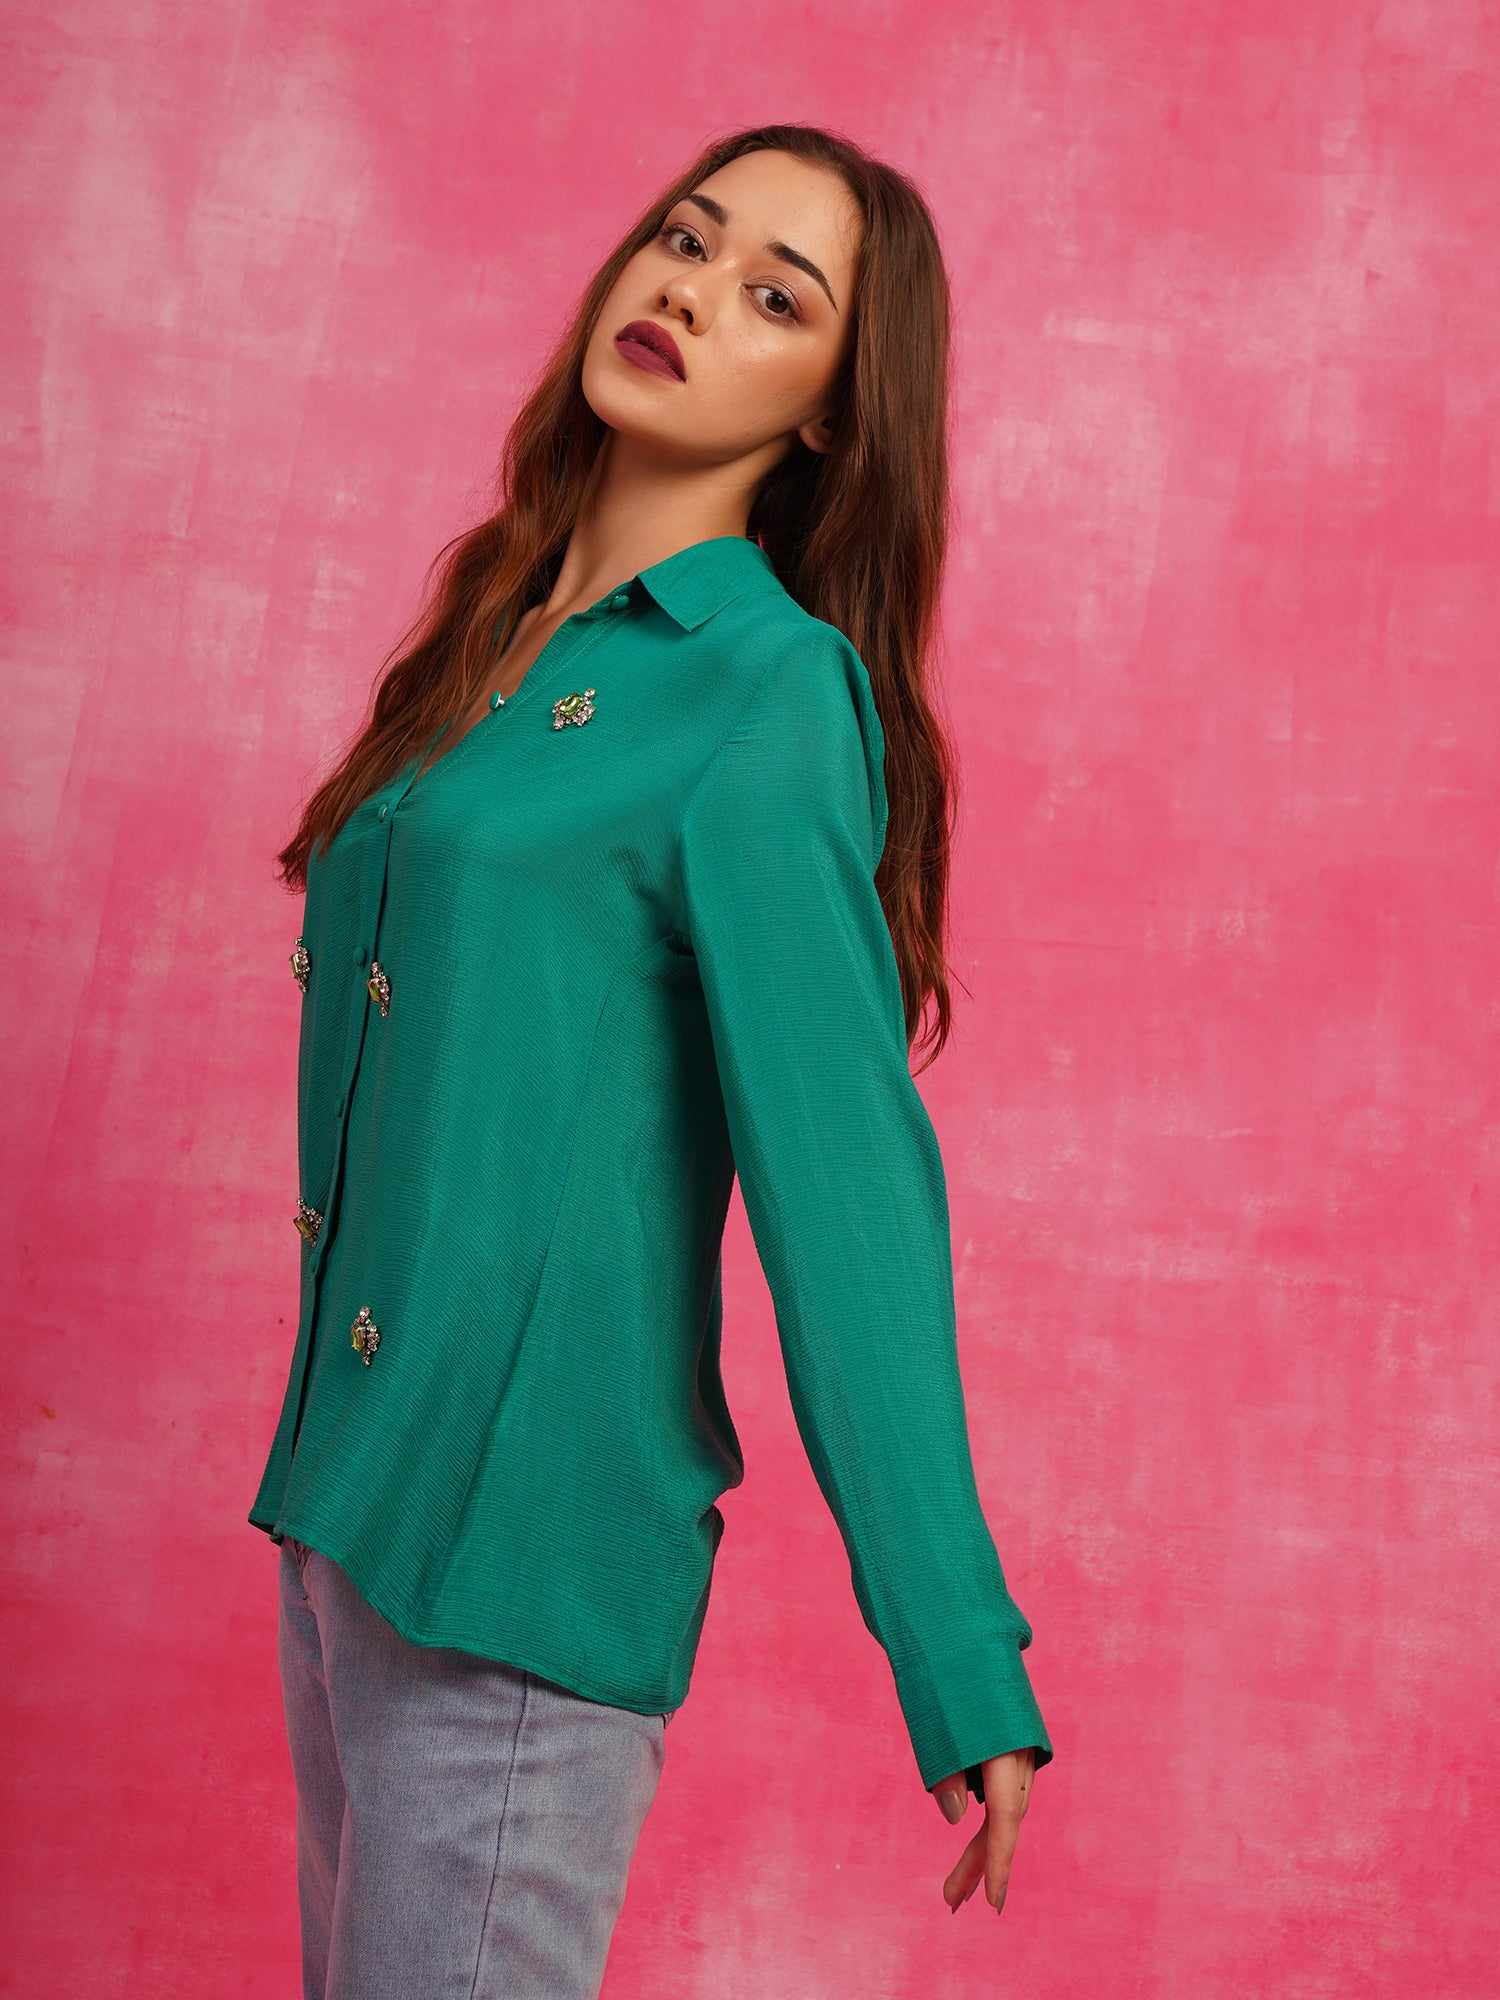 deluxe embellished green crystal shirt